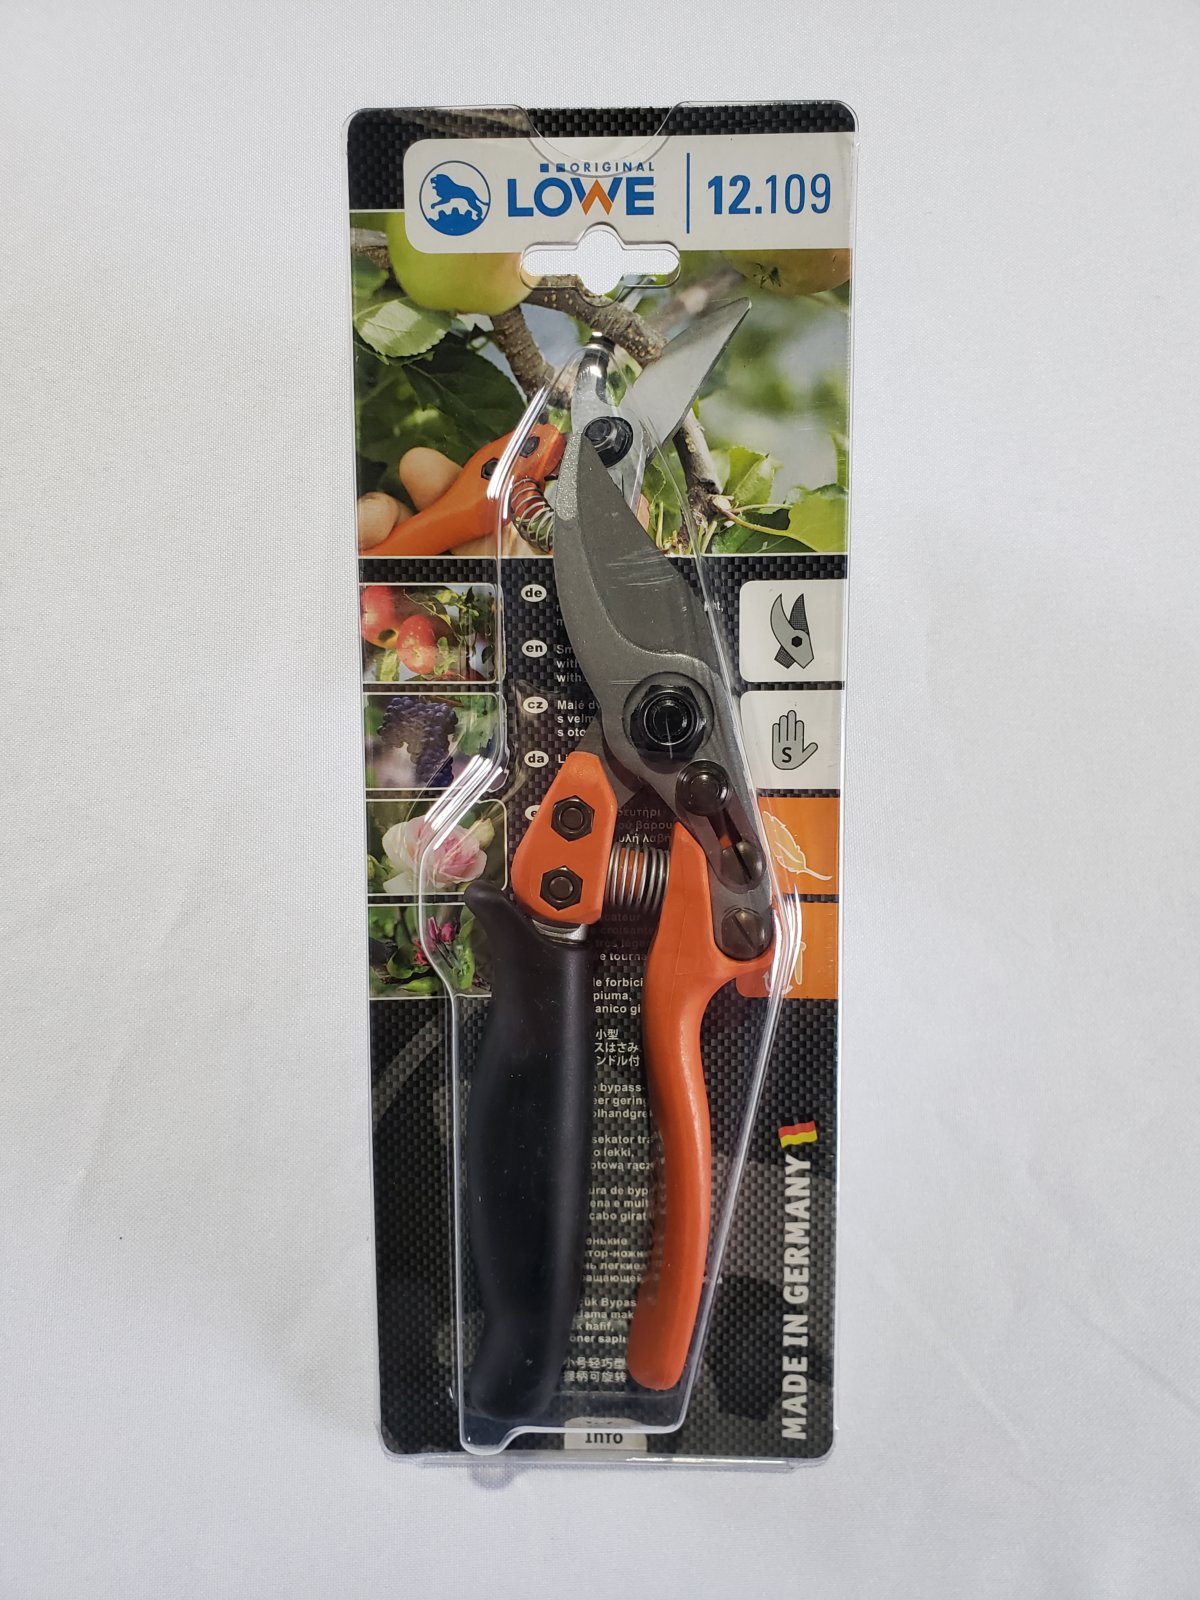 Lowe No 12.109 Pruning Shear, Rotating Handle (Comparable to Felco 12)